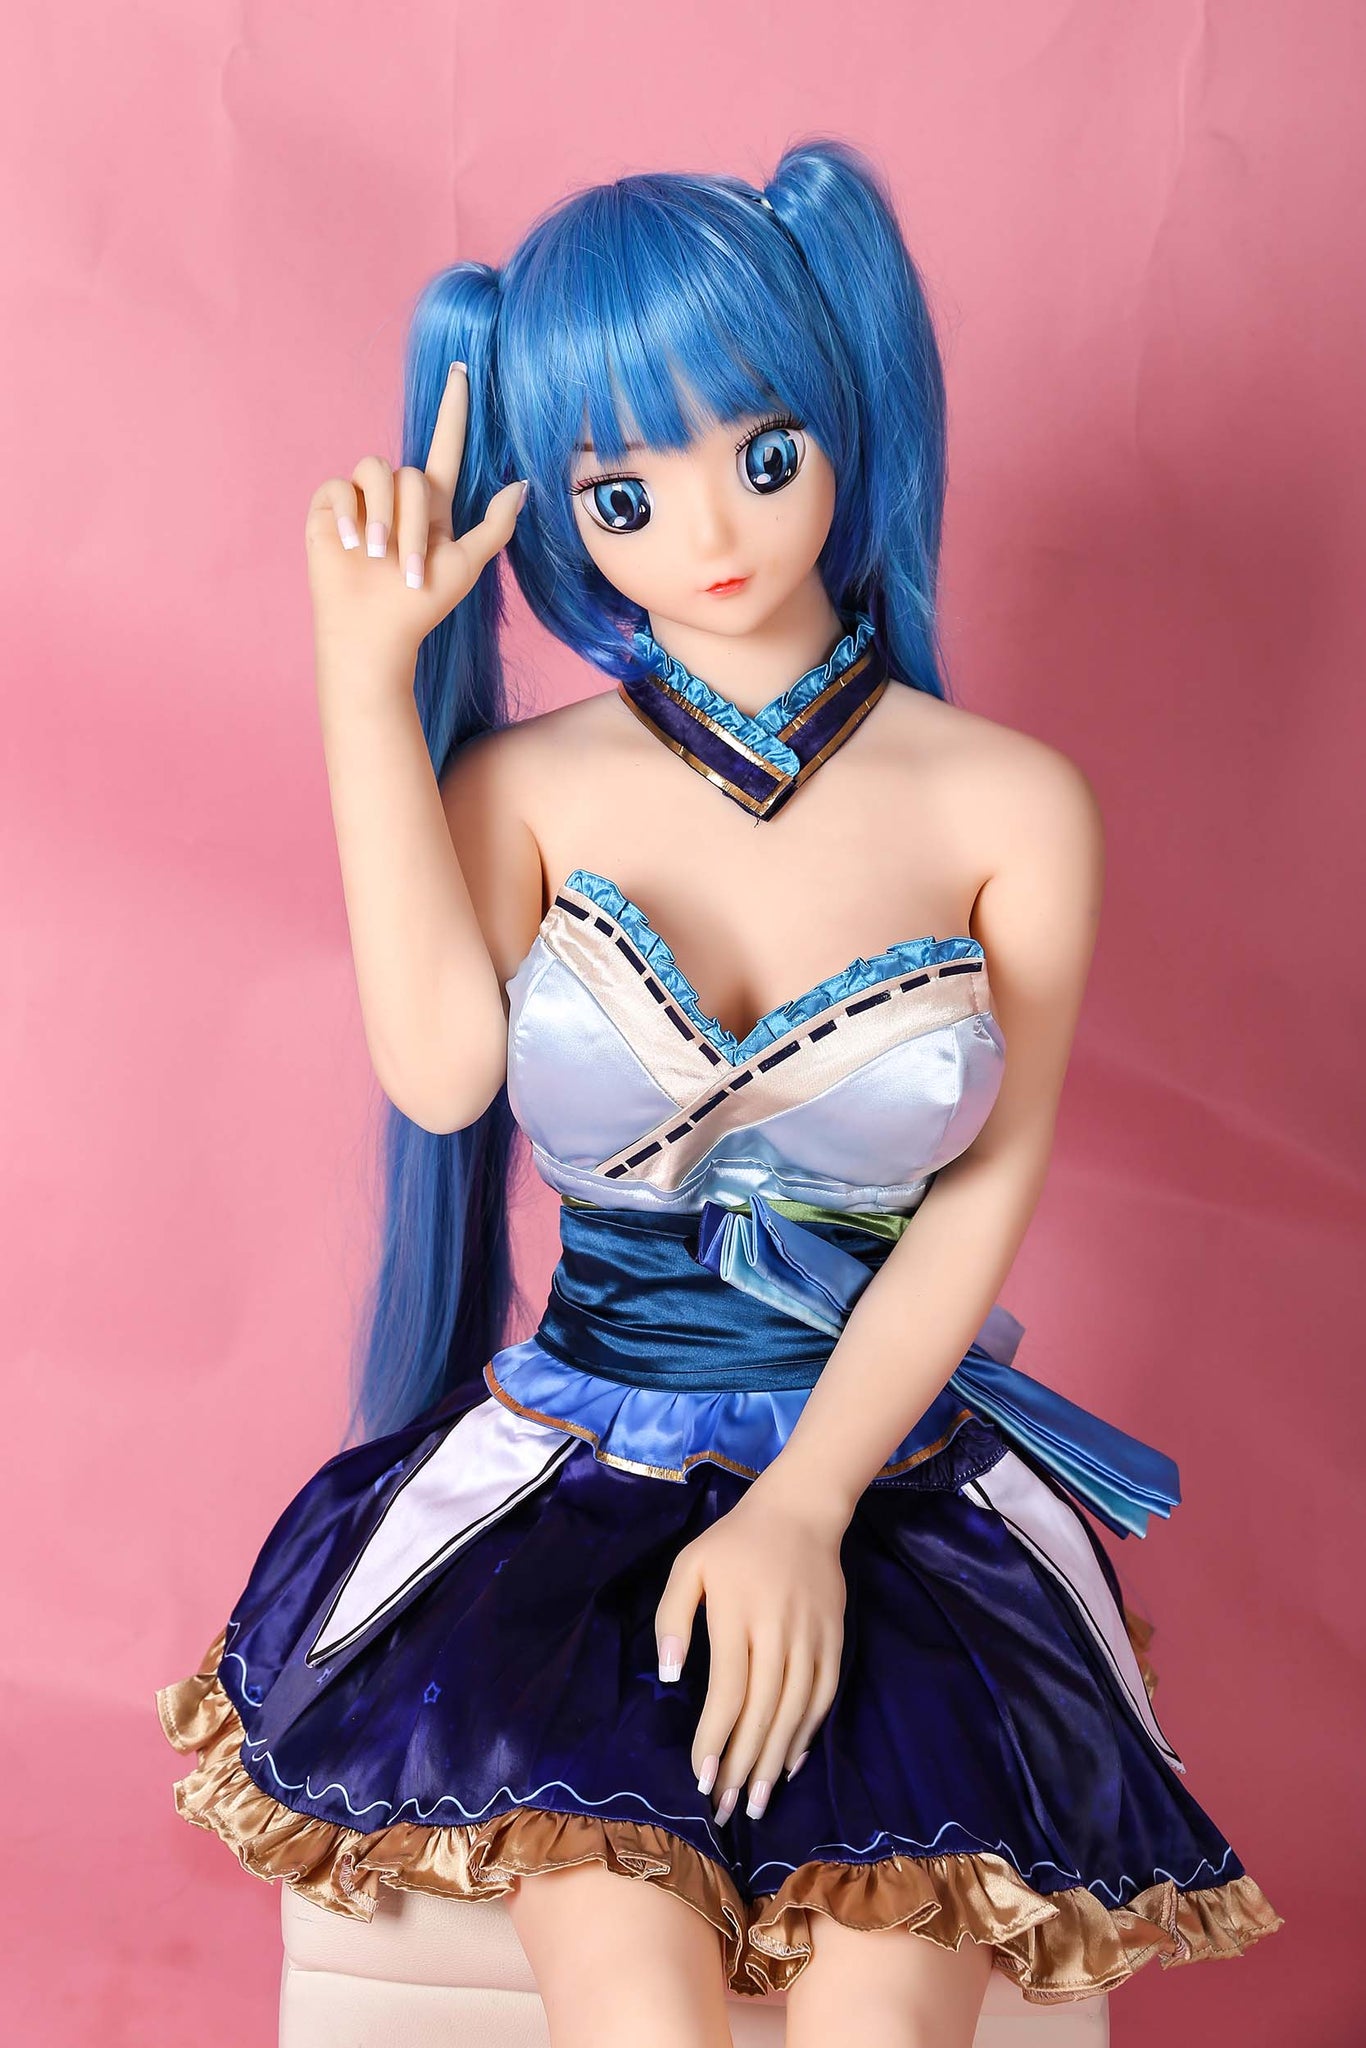 Anime real doll - Brittany